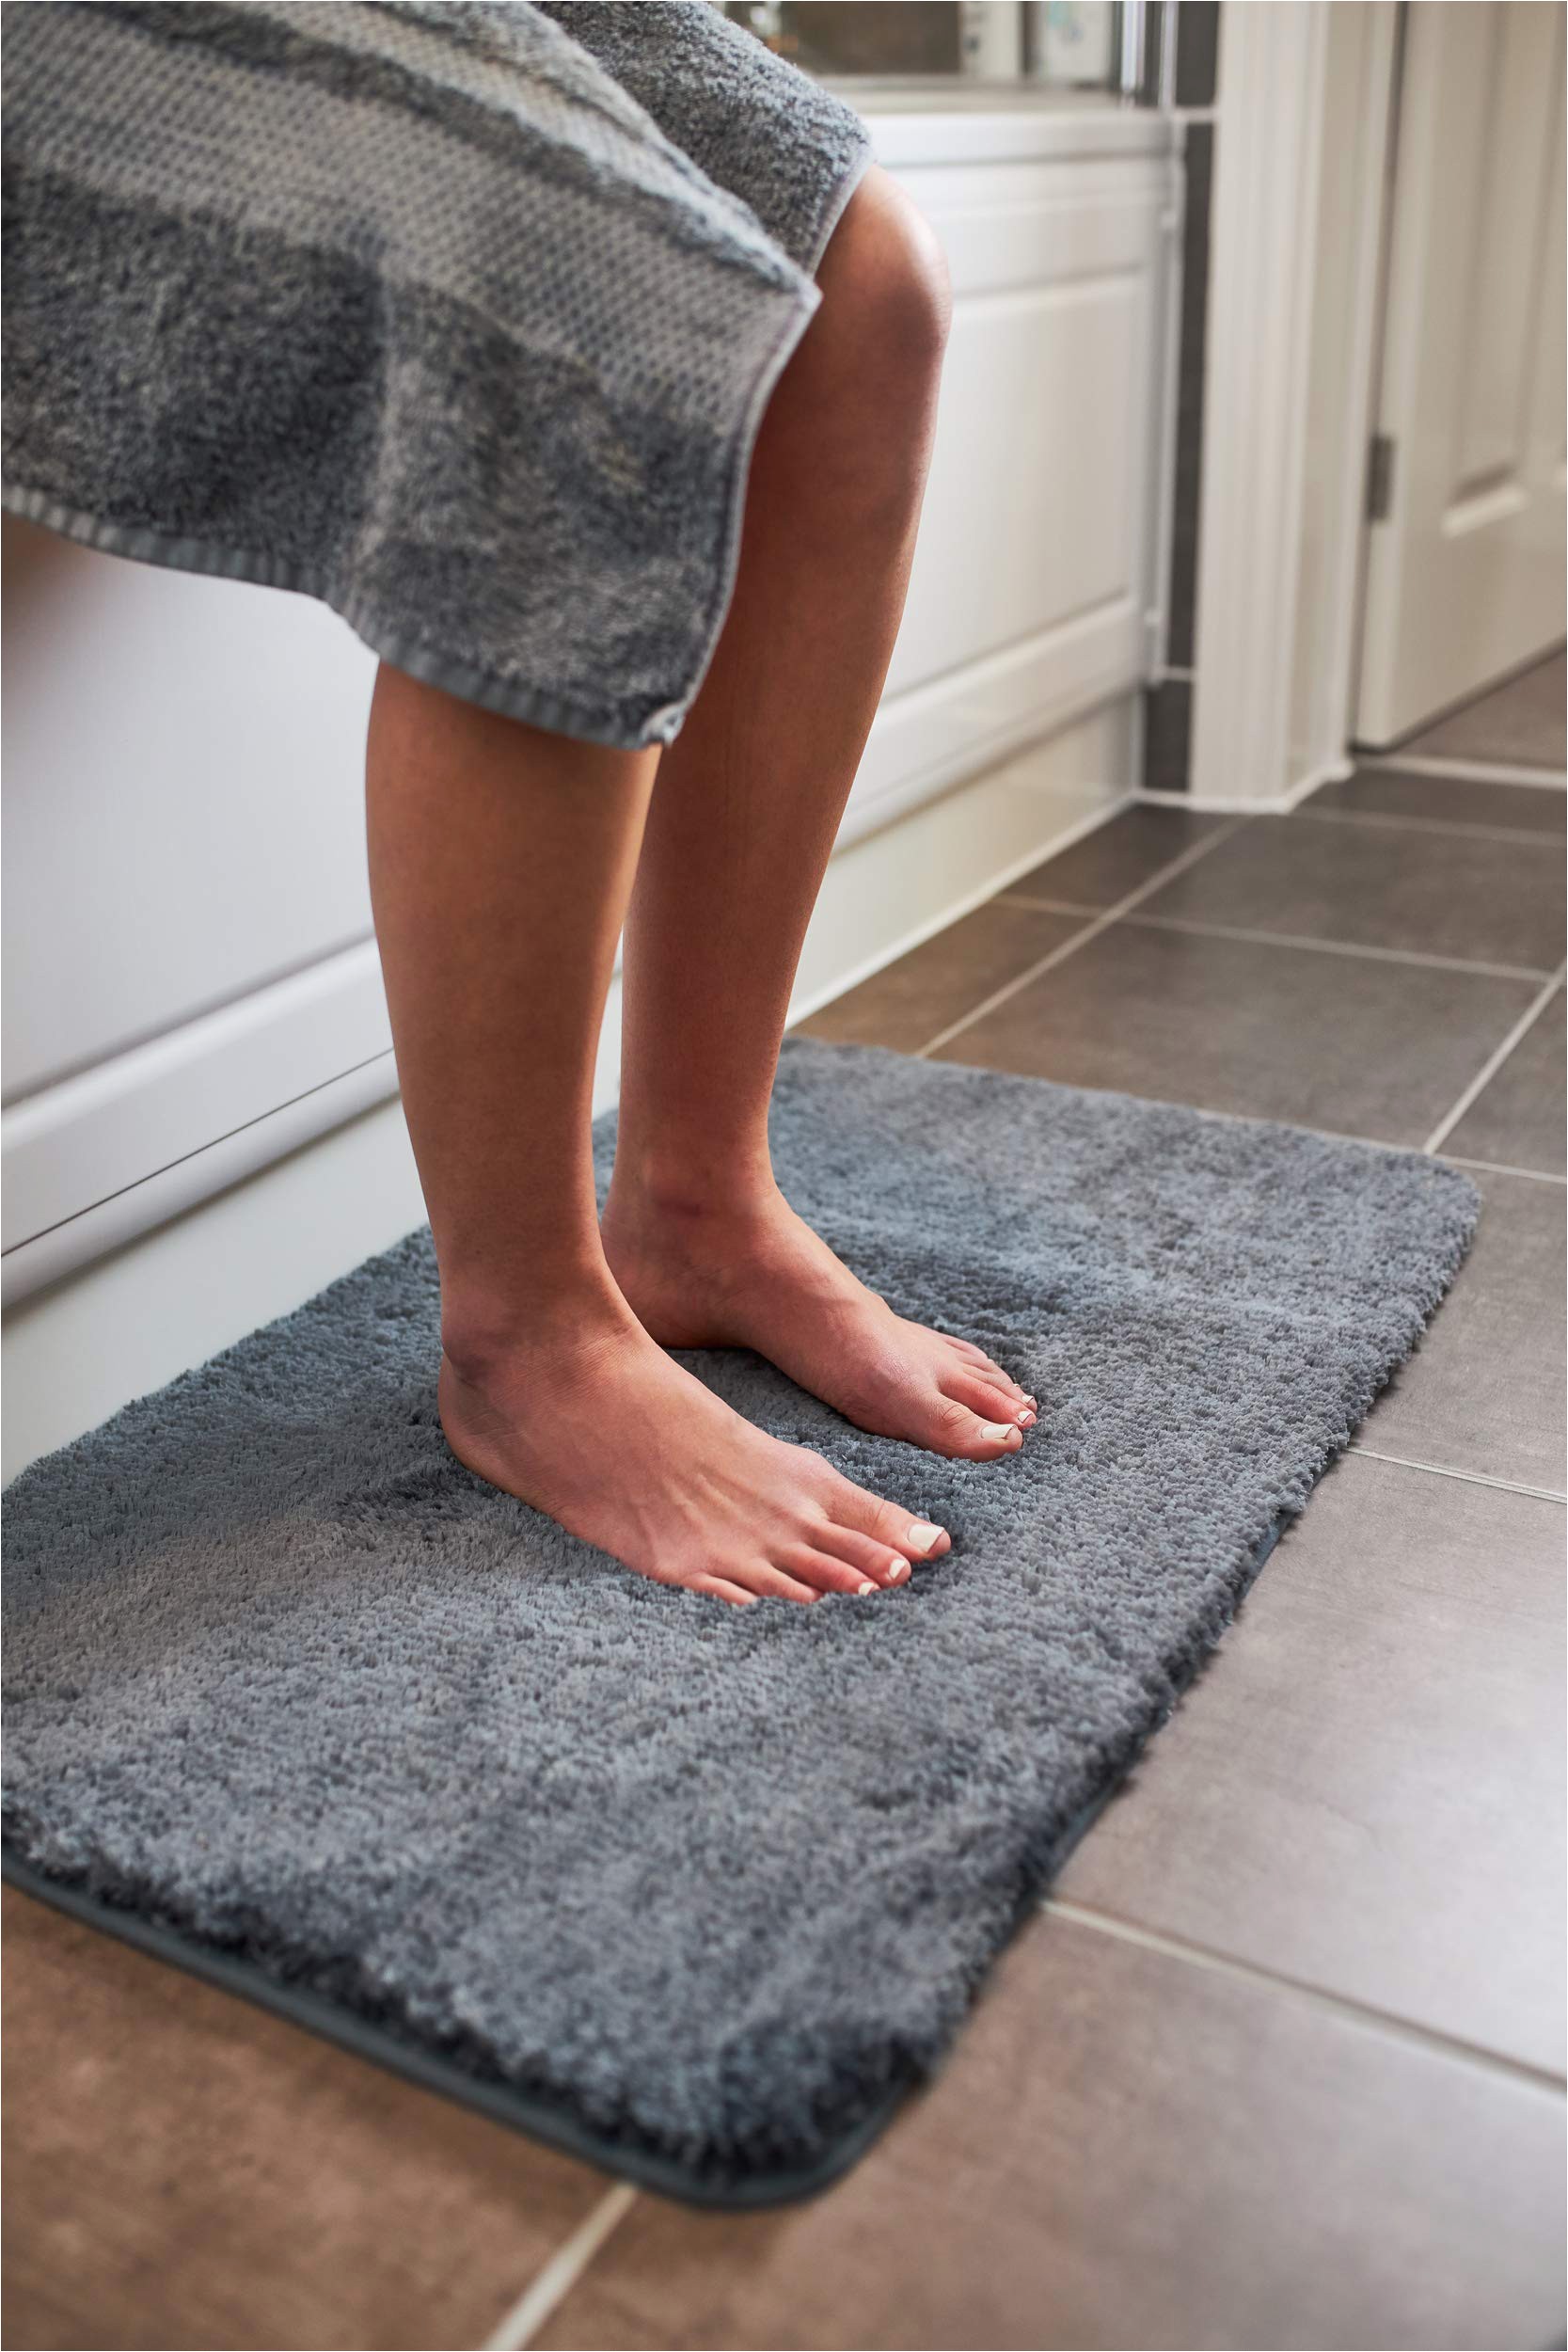 Bath Mats that Look Like Rugs Luxury Grey Bath Mat Microfiber Non Slip Bath Rug with Super soft Absorbent Dry Fast Design for Bath and Shower